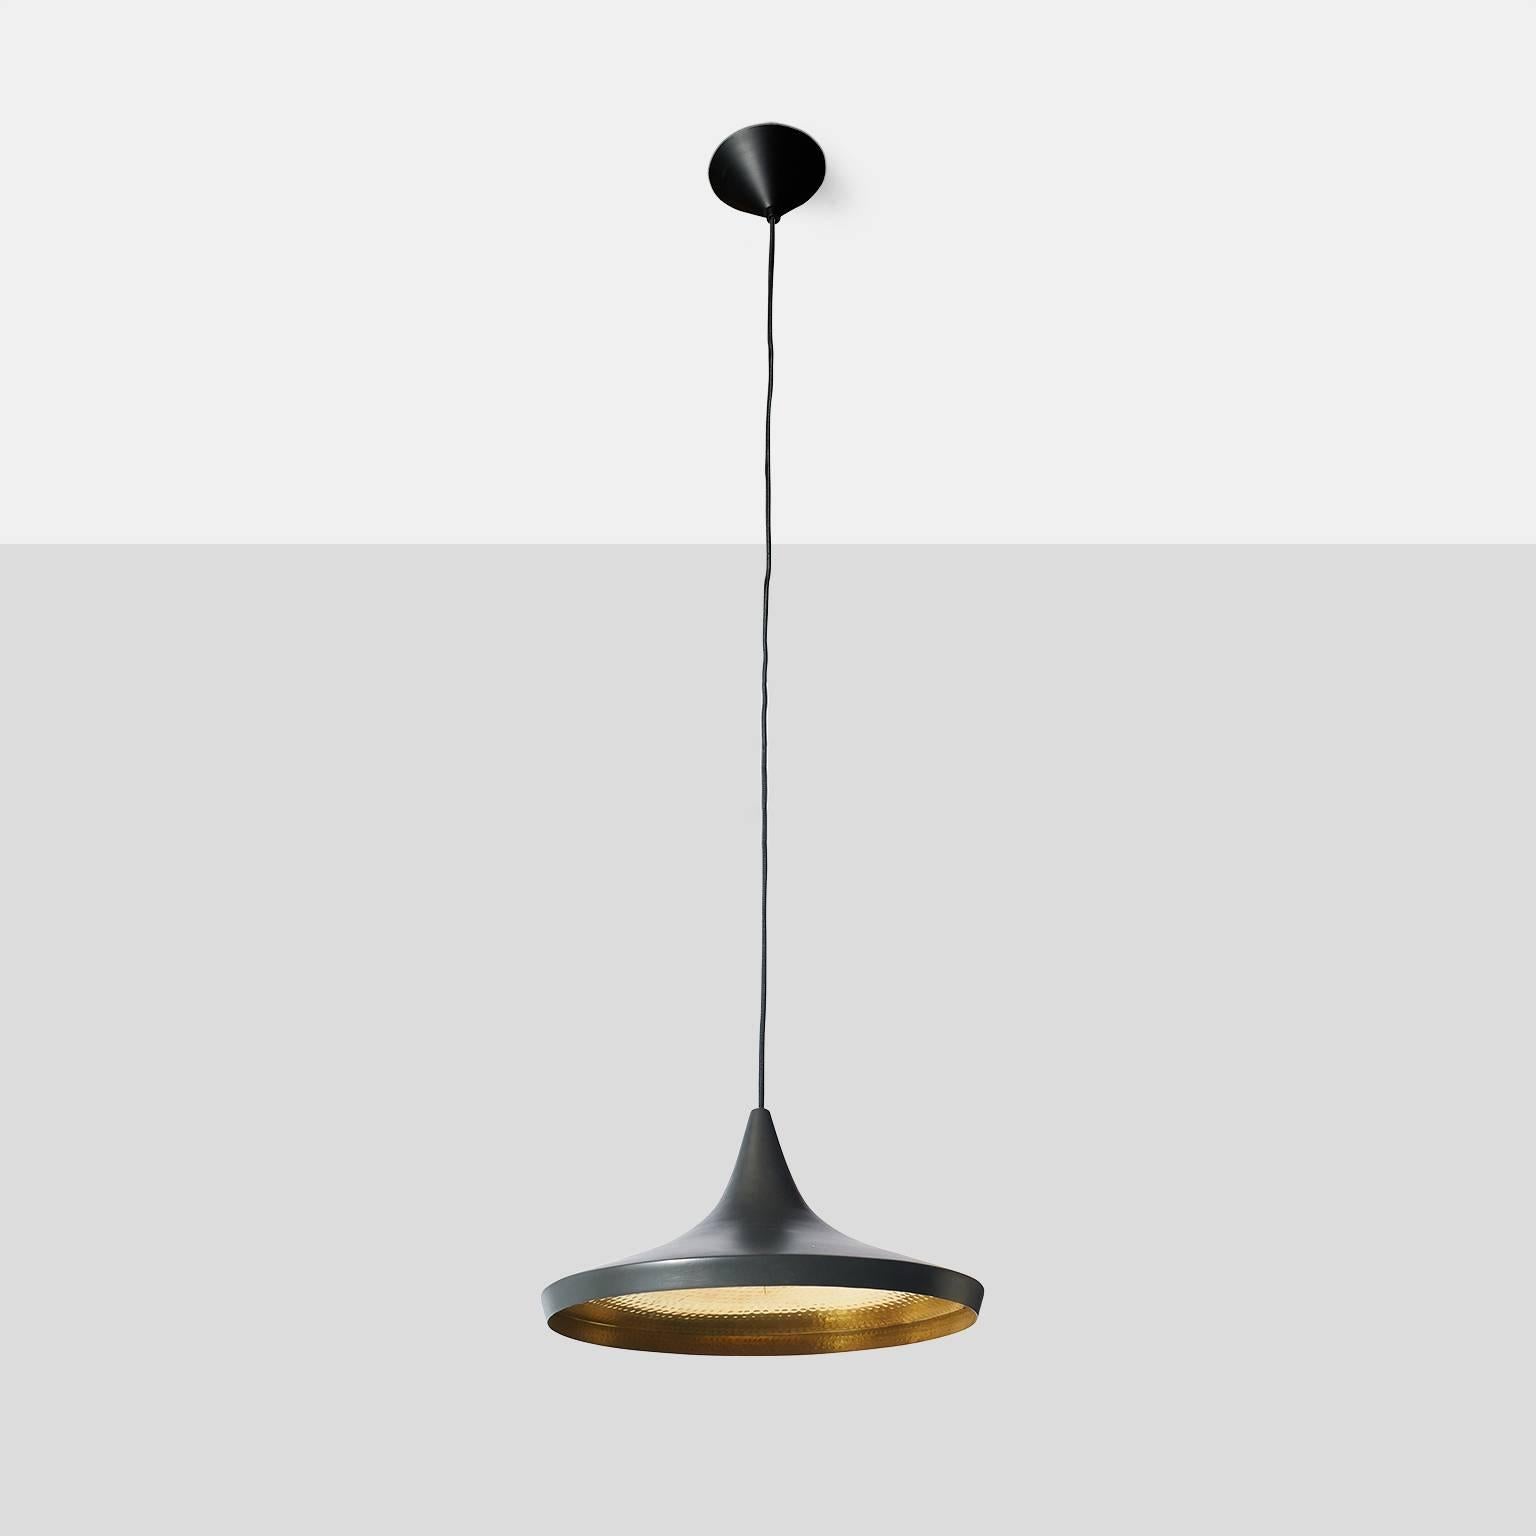 A matte black enameled brass lamp with hand beat detail on brass interior and a smooth exterior. Cord length is 6' and can be adjusted.